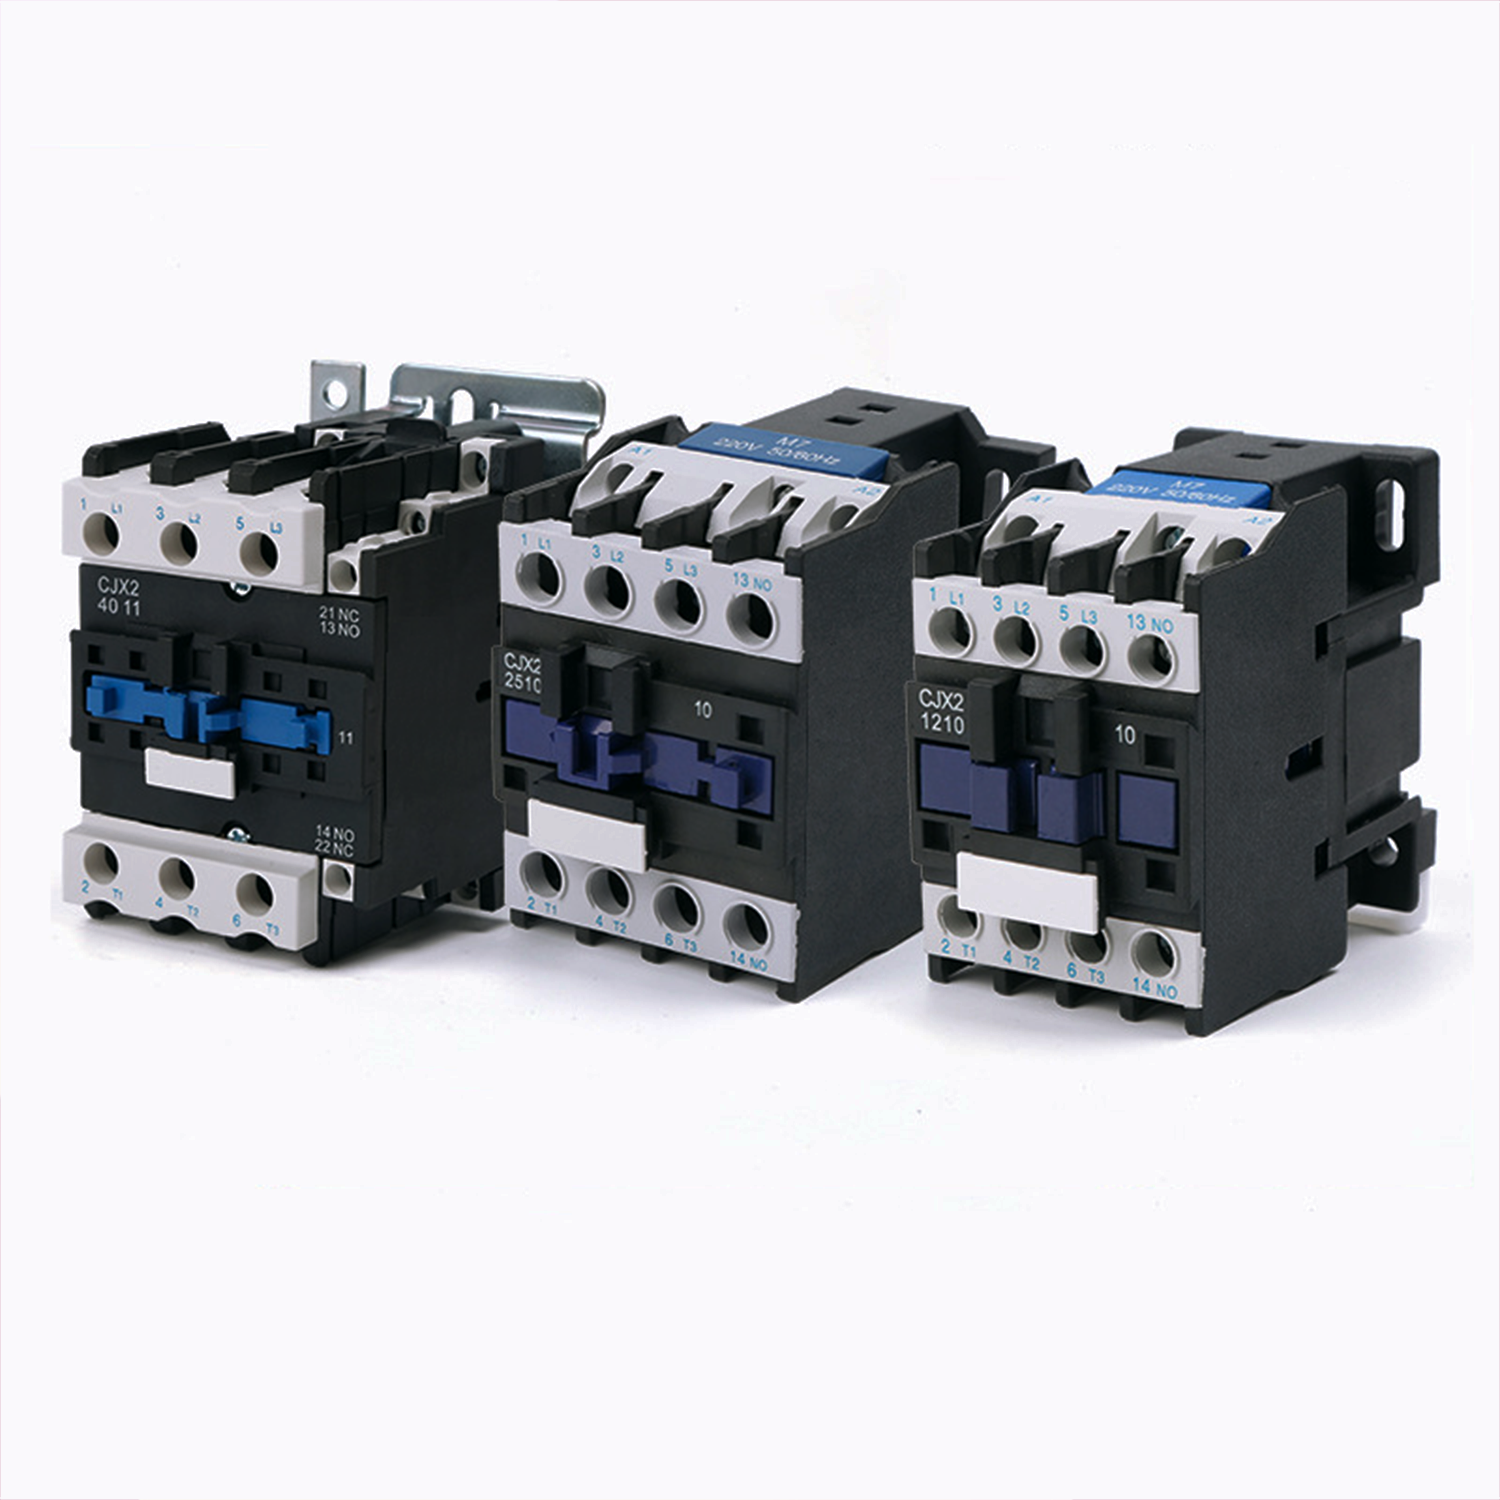 Components and working principle of AC contactor